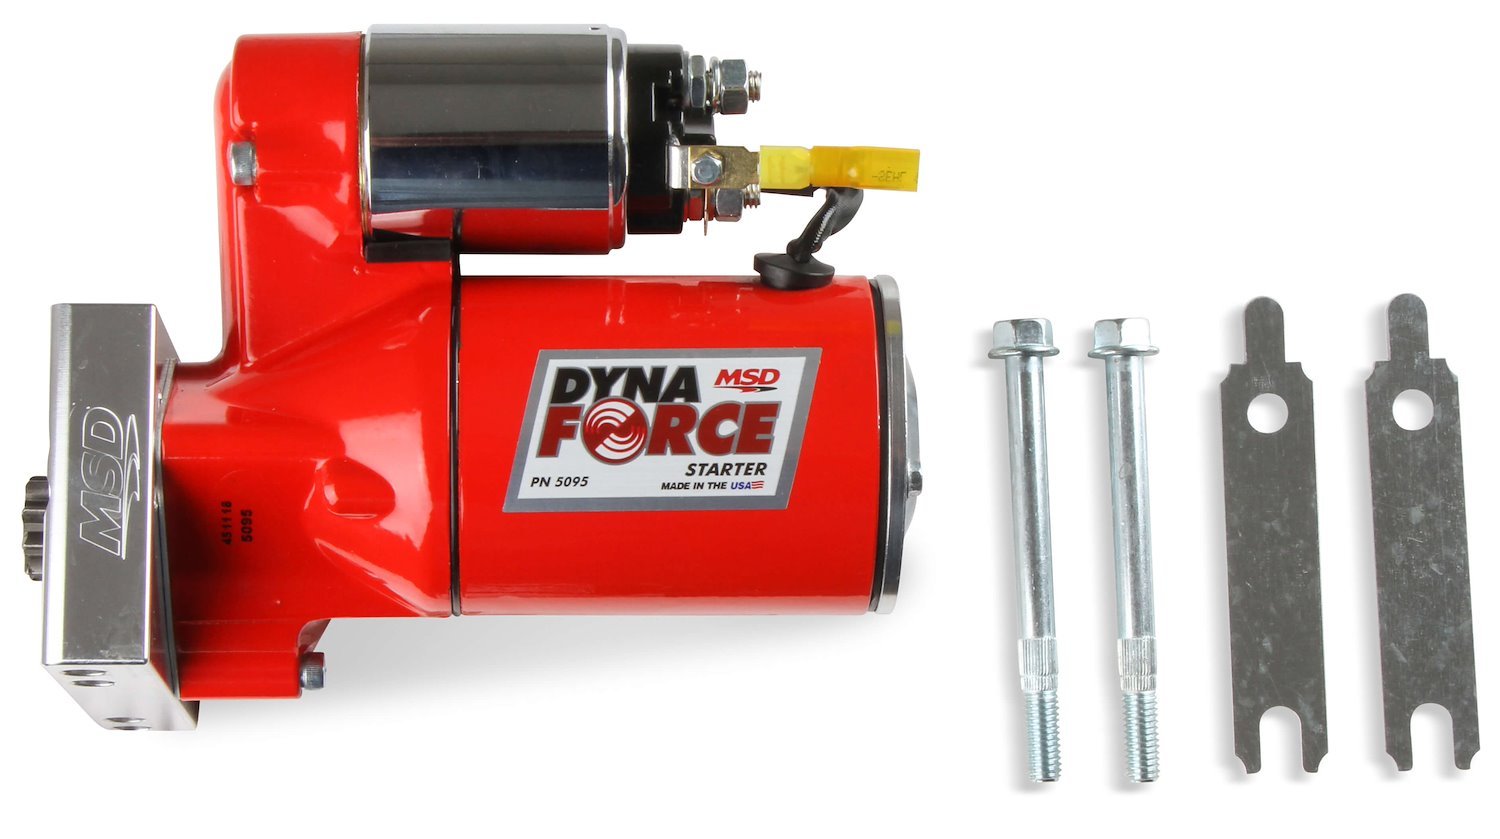 5095 DynaForce High-Torque Starter for Chevy Small, Big Block Engines w/Straight Mount Holes [Red]